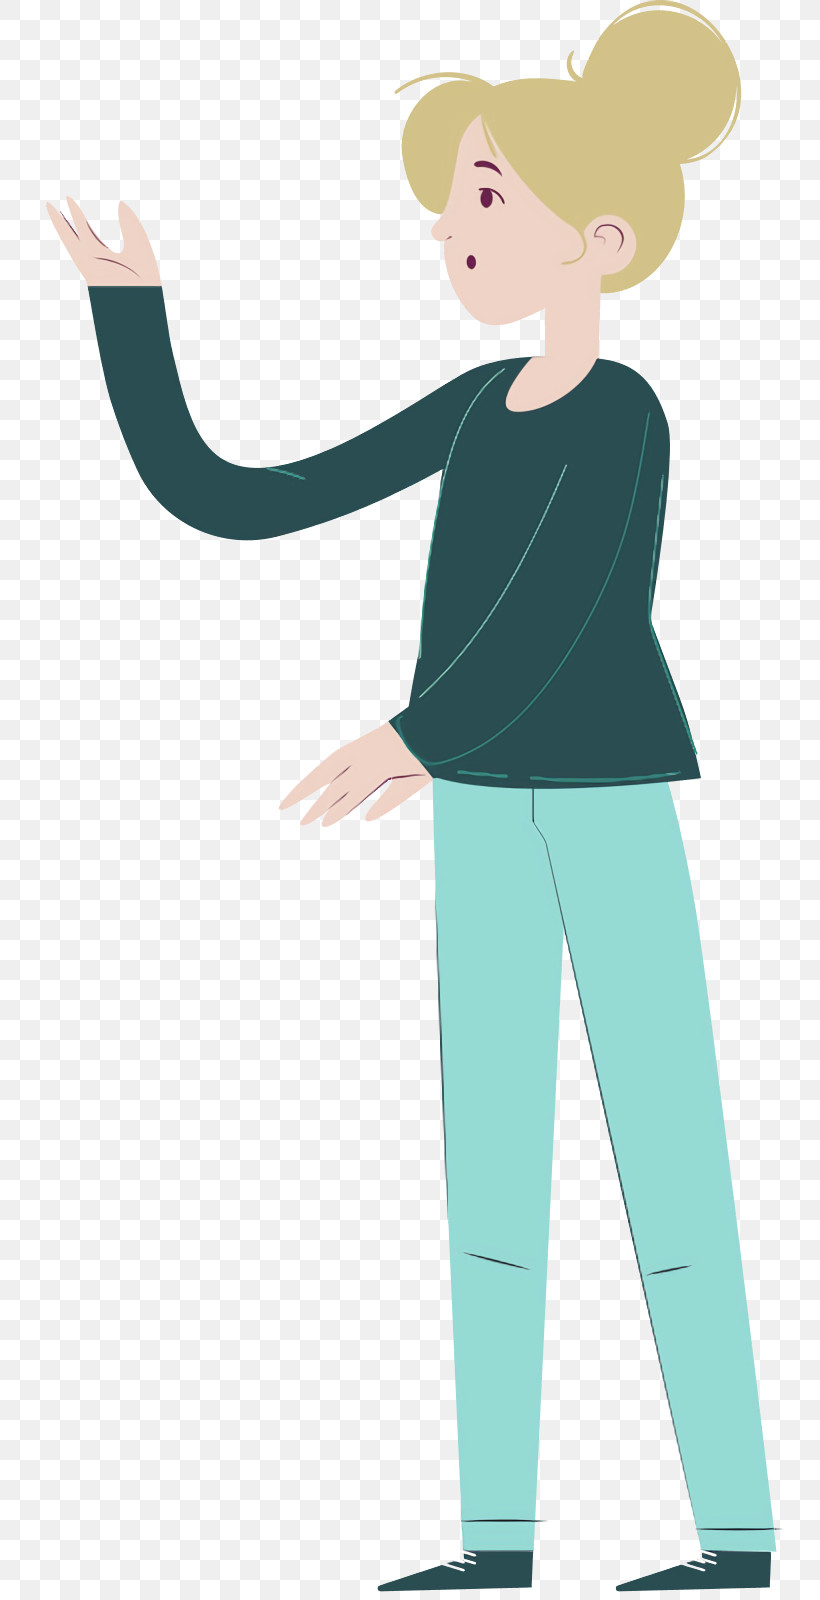 Clothing Cartoon Teal Male Happiness, PNG, 748x1600px, Cartoon Girl, Cartoon, Cartoon Female, Cartoon Woman, Clothing Download Free